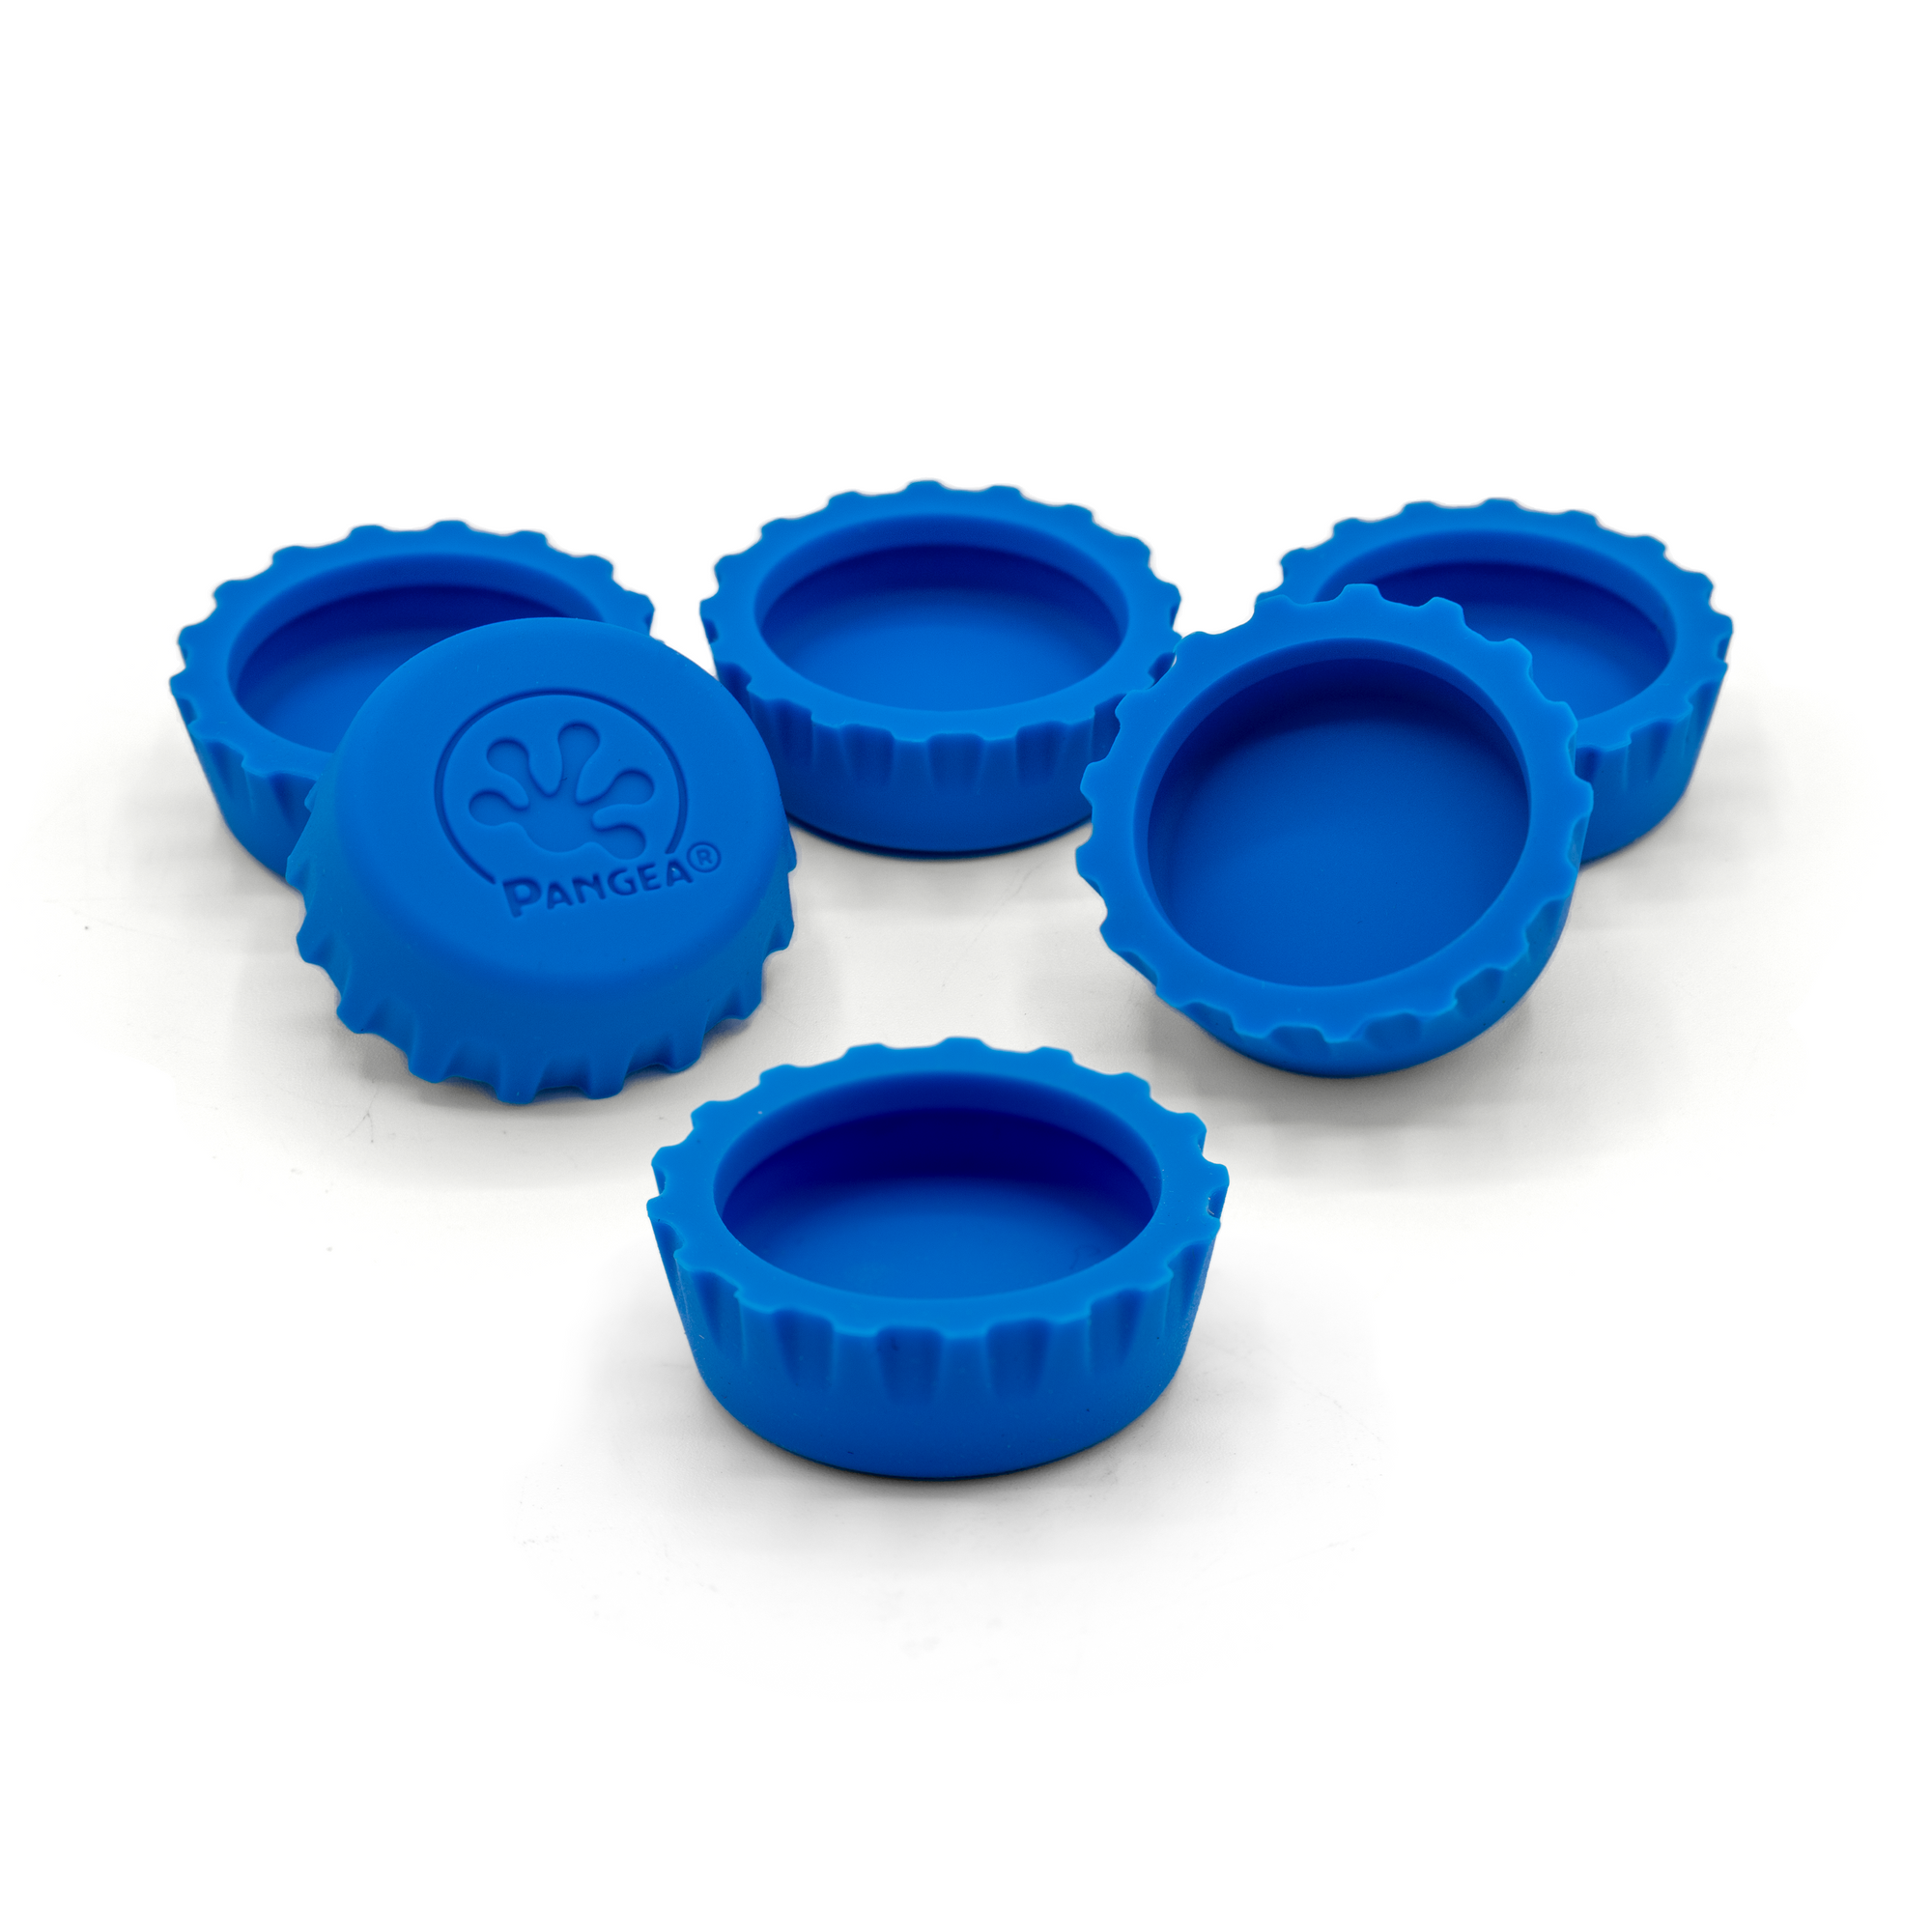 6-Pack of Silicone Bottle Caps - Blue